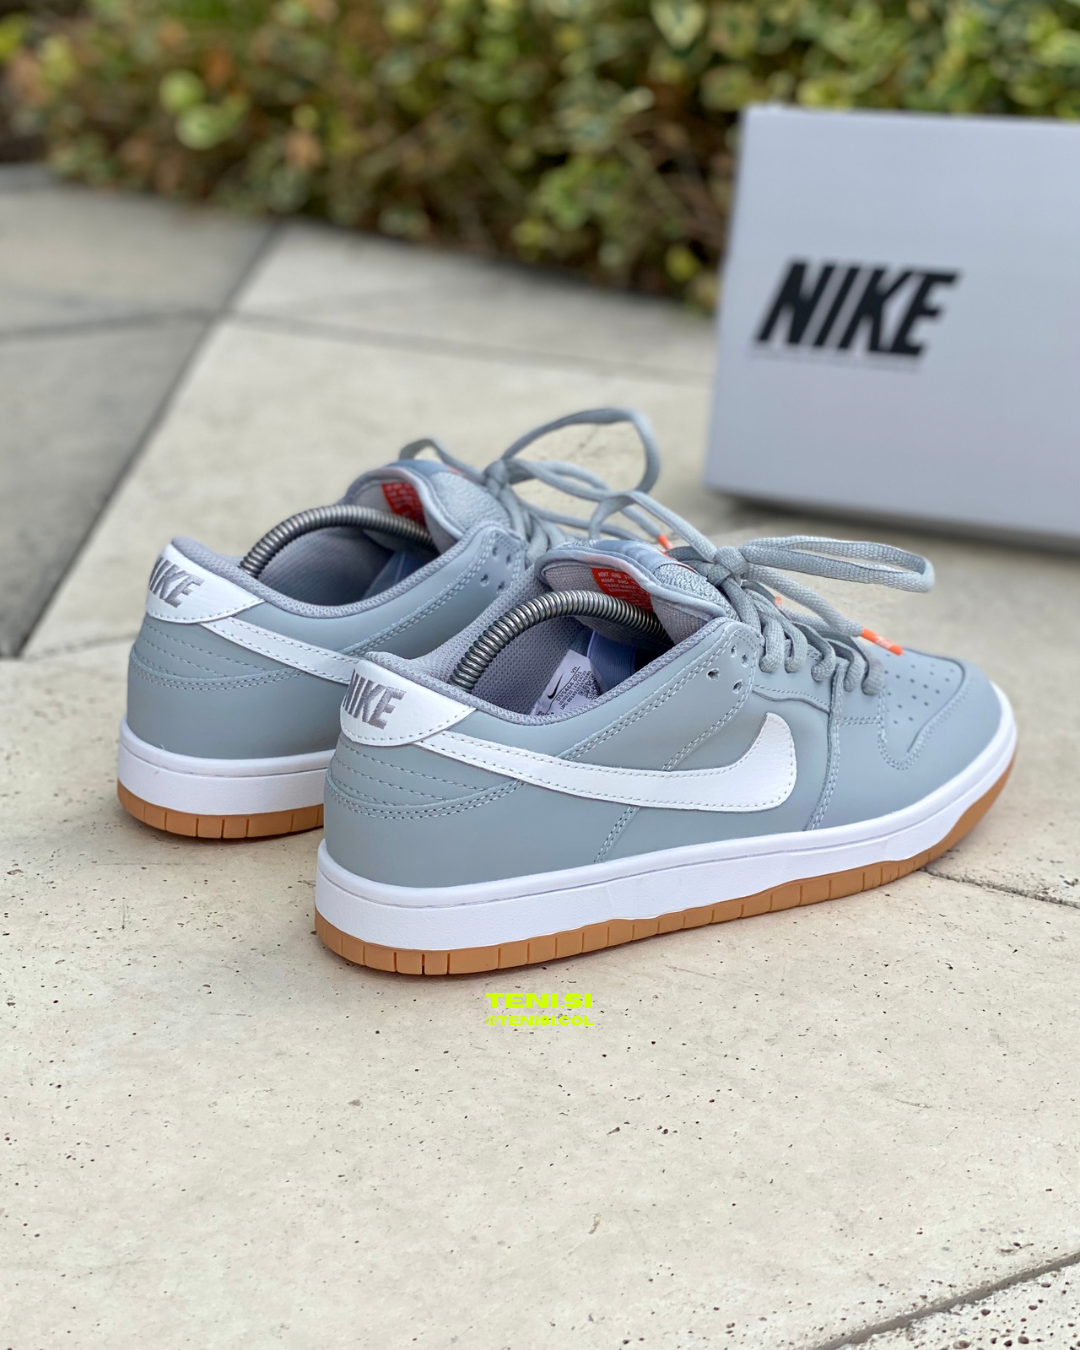 Nike Dunk Low Pro ISO “Golf Gray GUM”